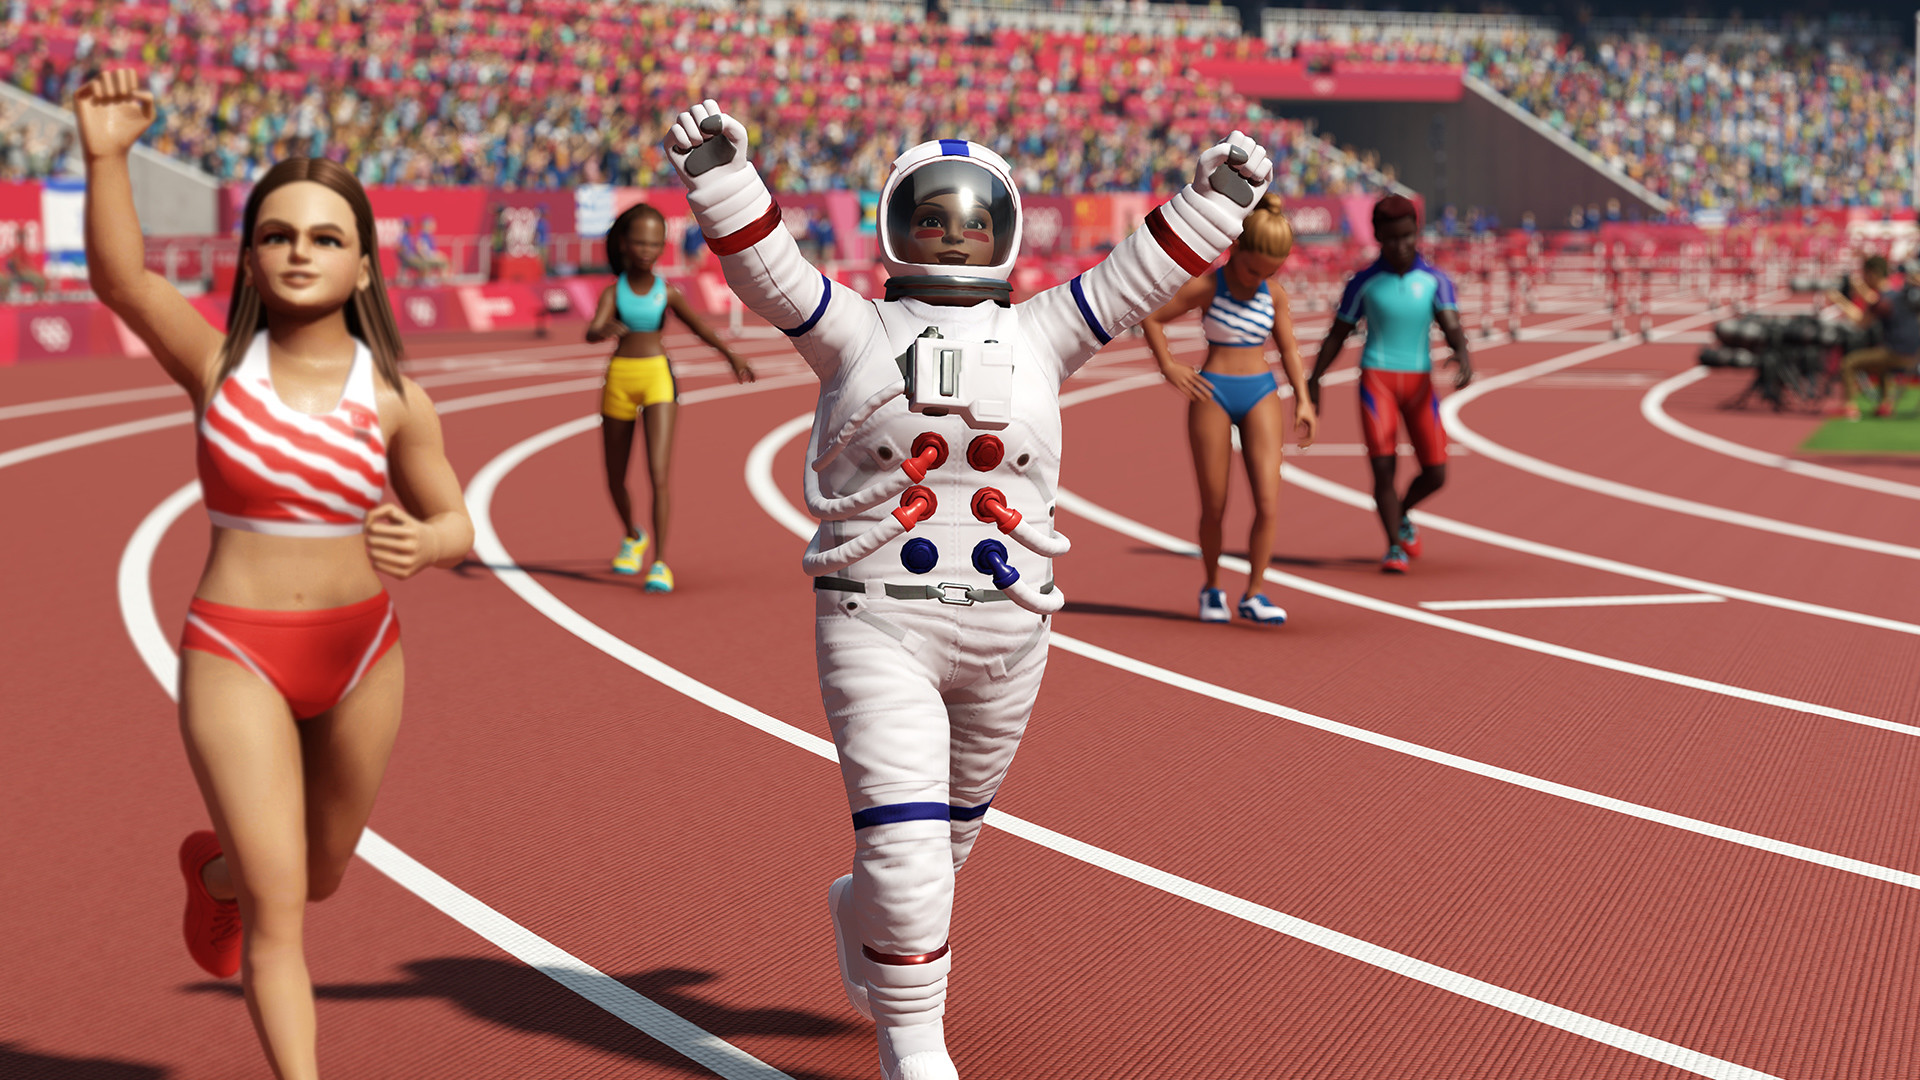 Olympic Games Tokyo 2020 - The Official Video Game EU Steam CD Key, 9.45$